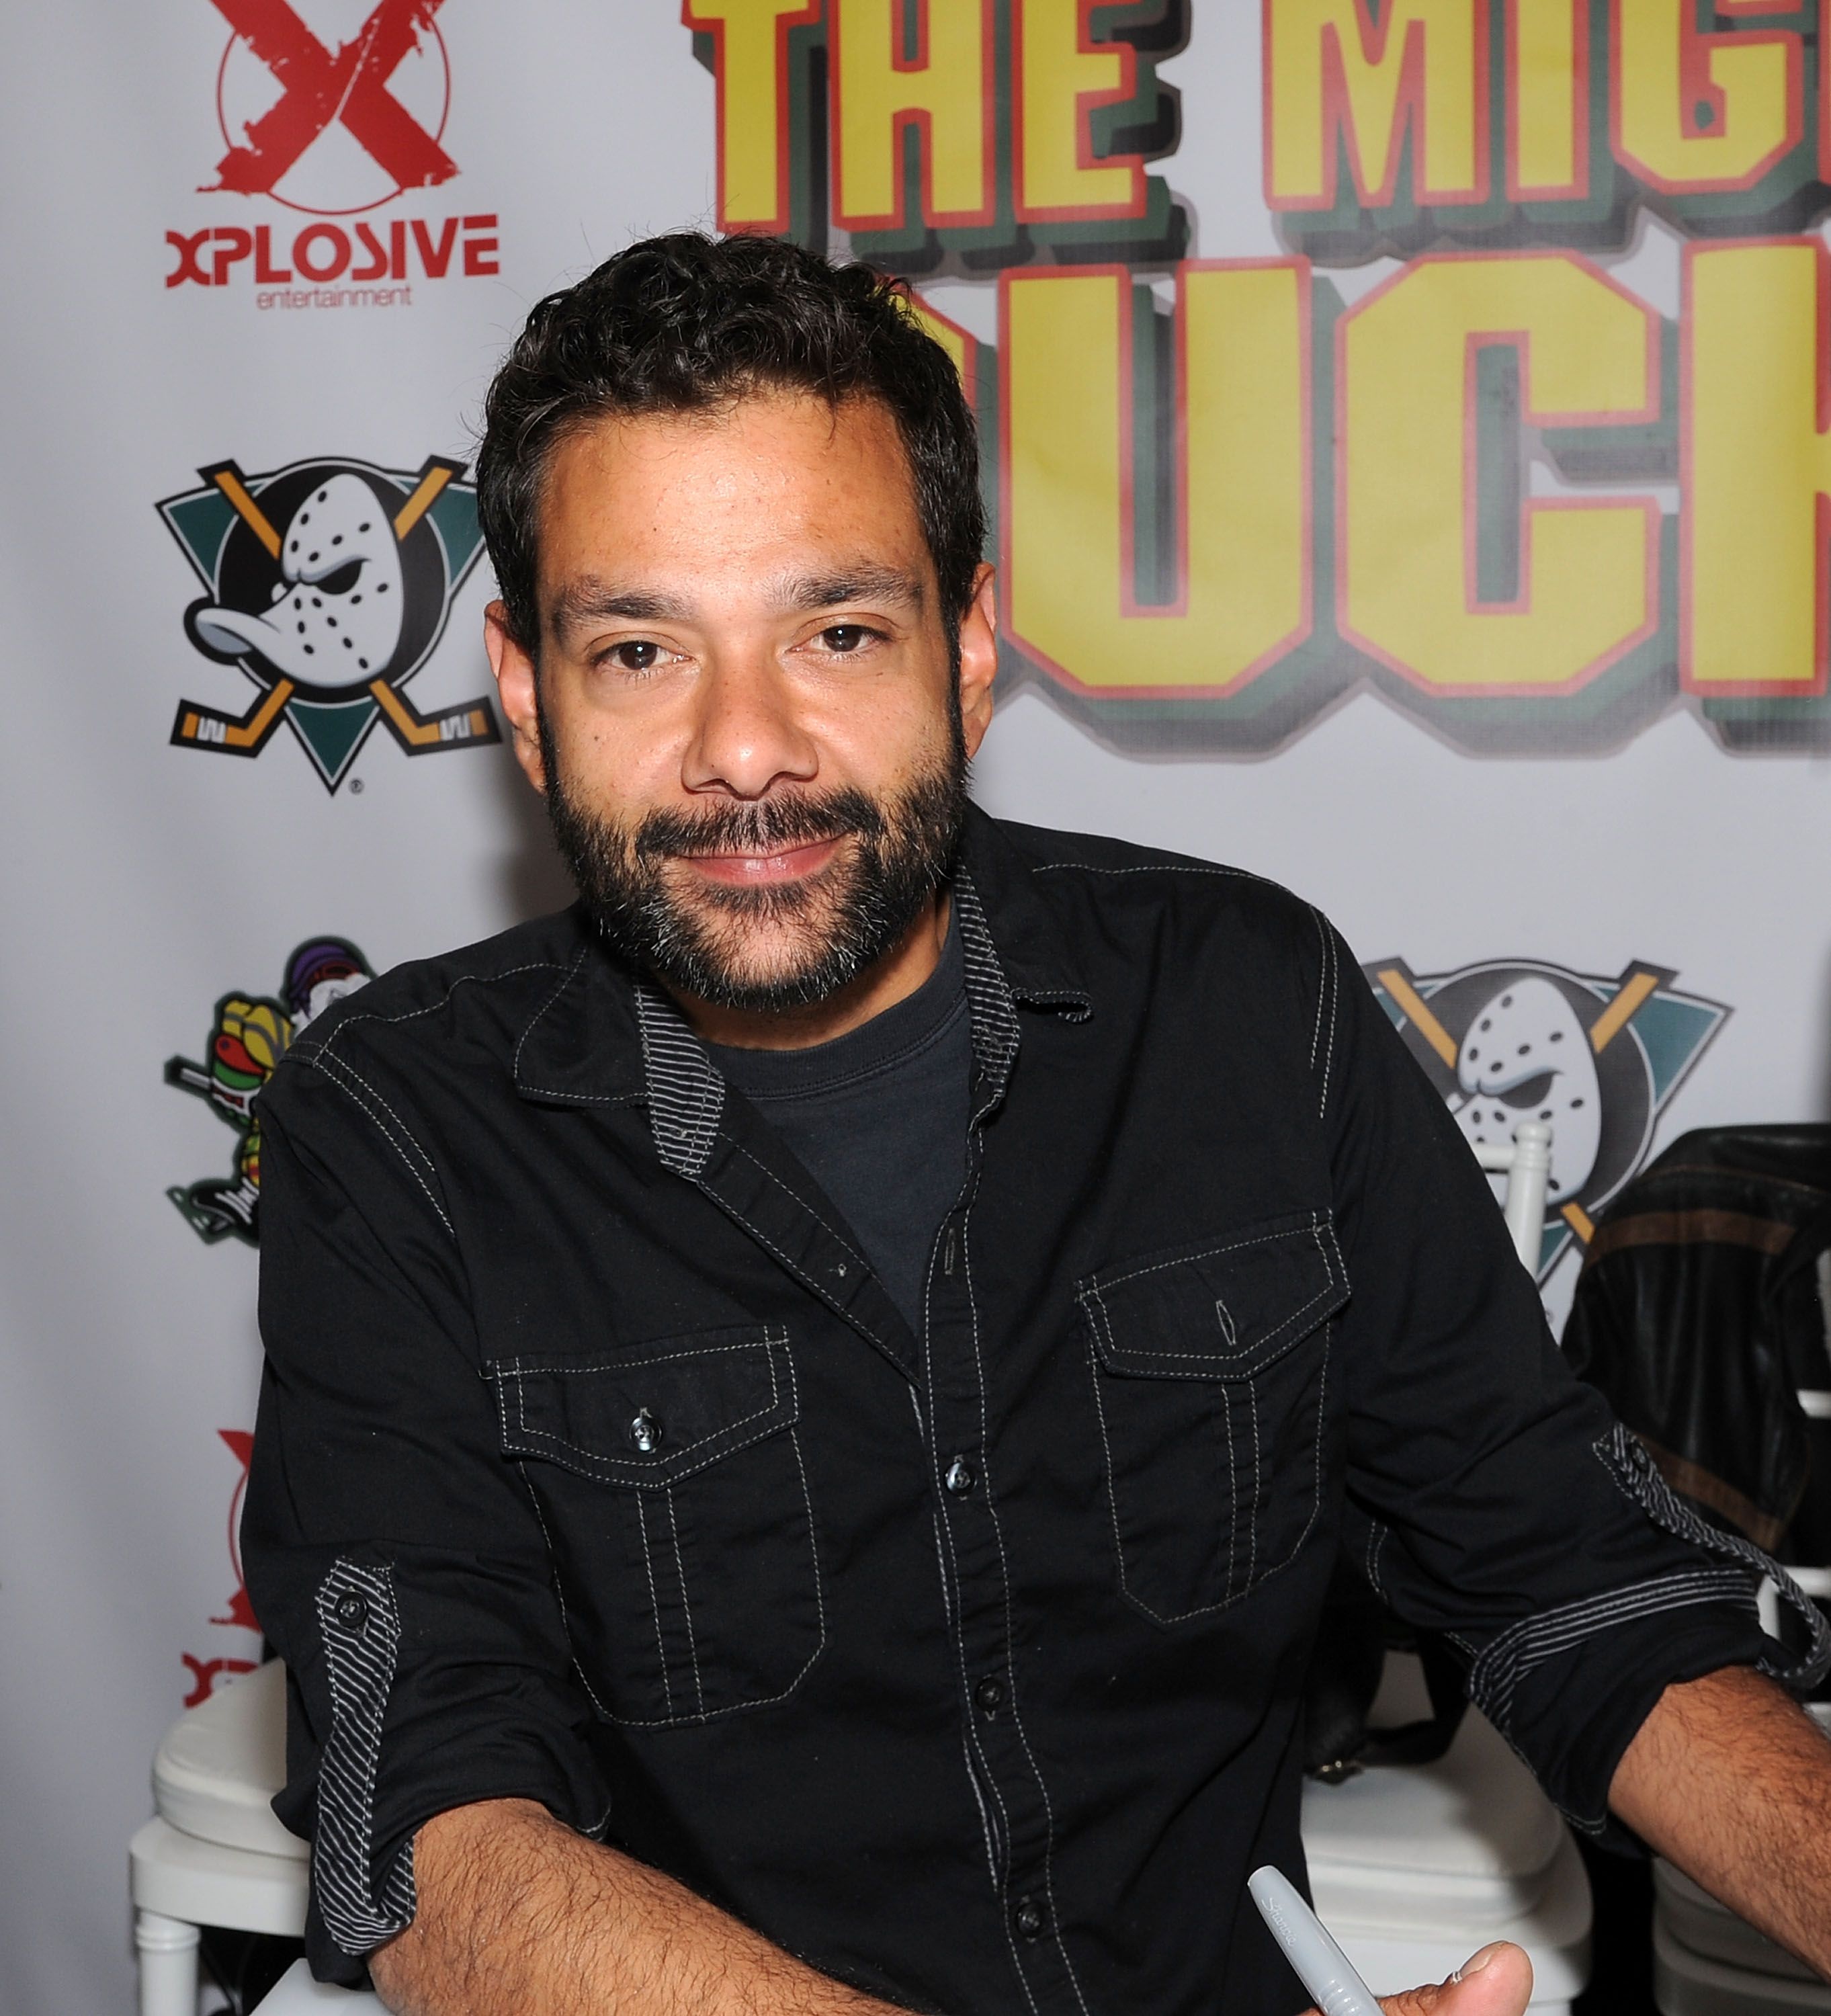 Shaun Weiss at the Chiller Theater Expo on April 25, 2015 in Parsippany, New Jersey. | Source: Getty Images